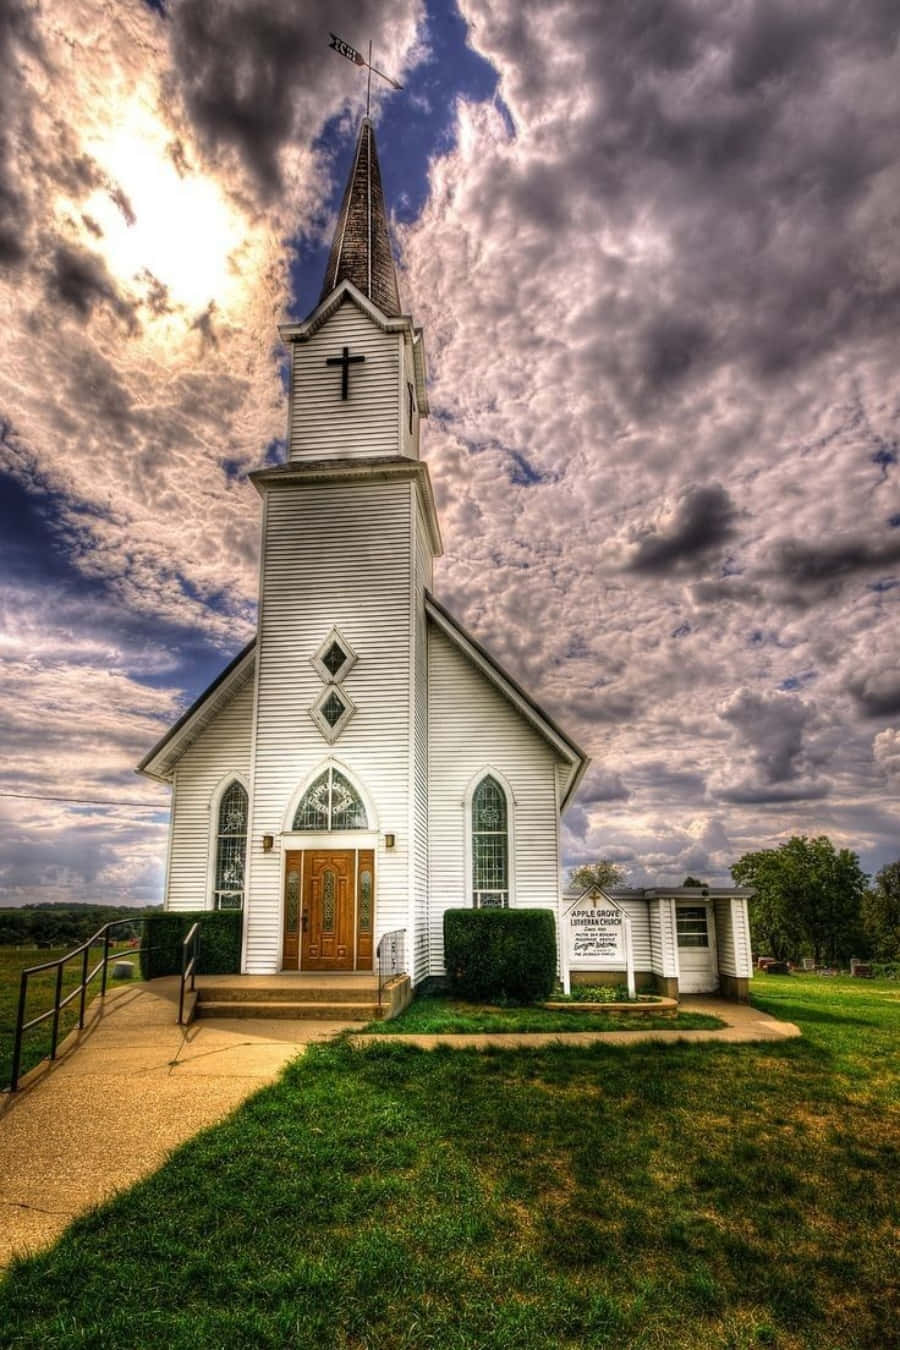 Find peace and serenity in this timeless Church